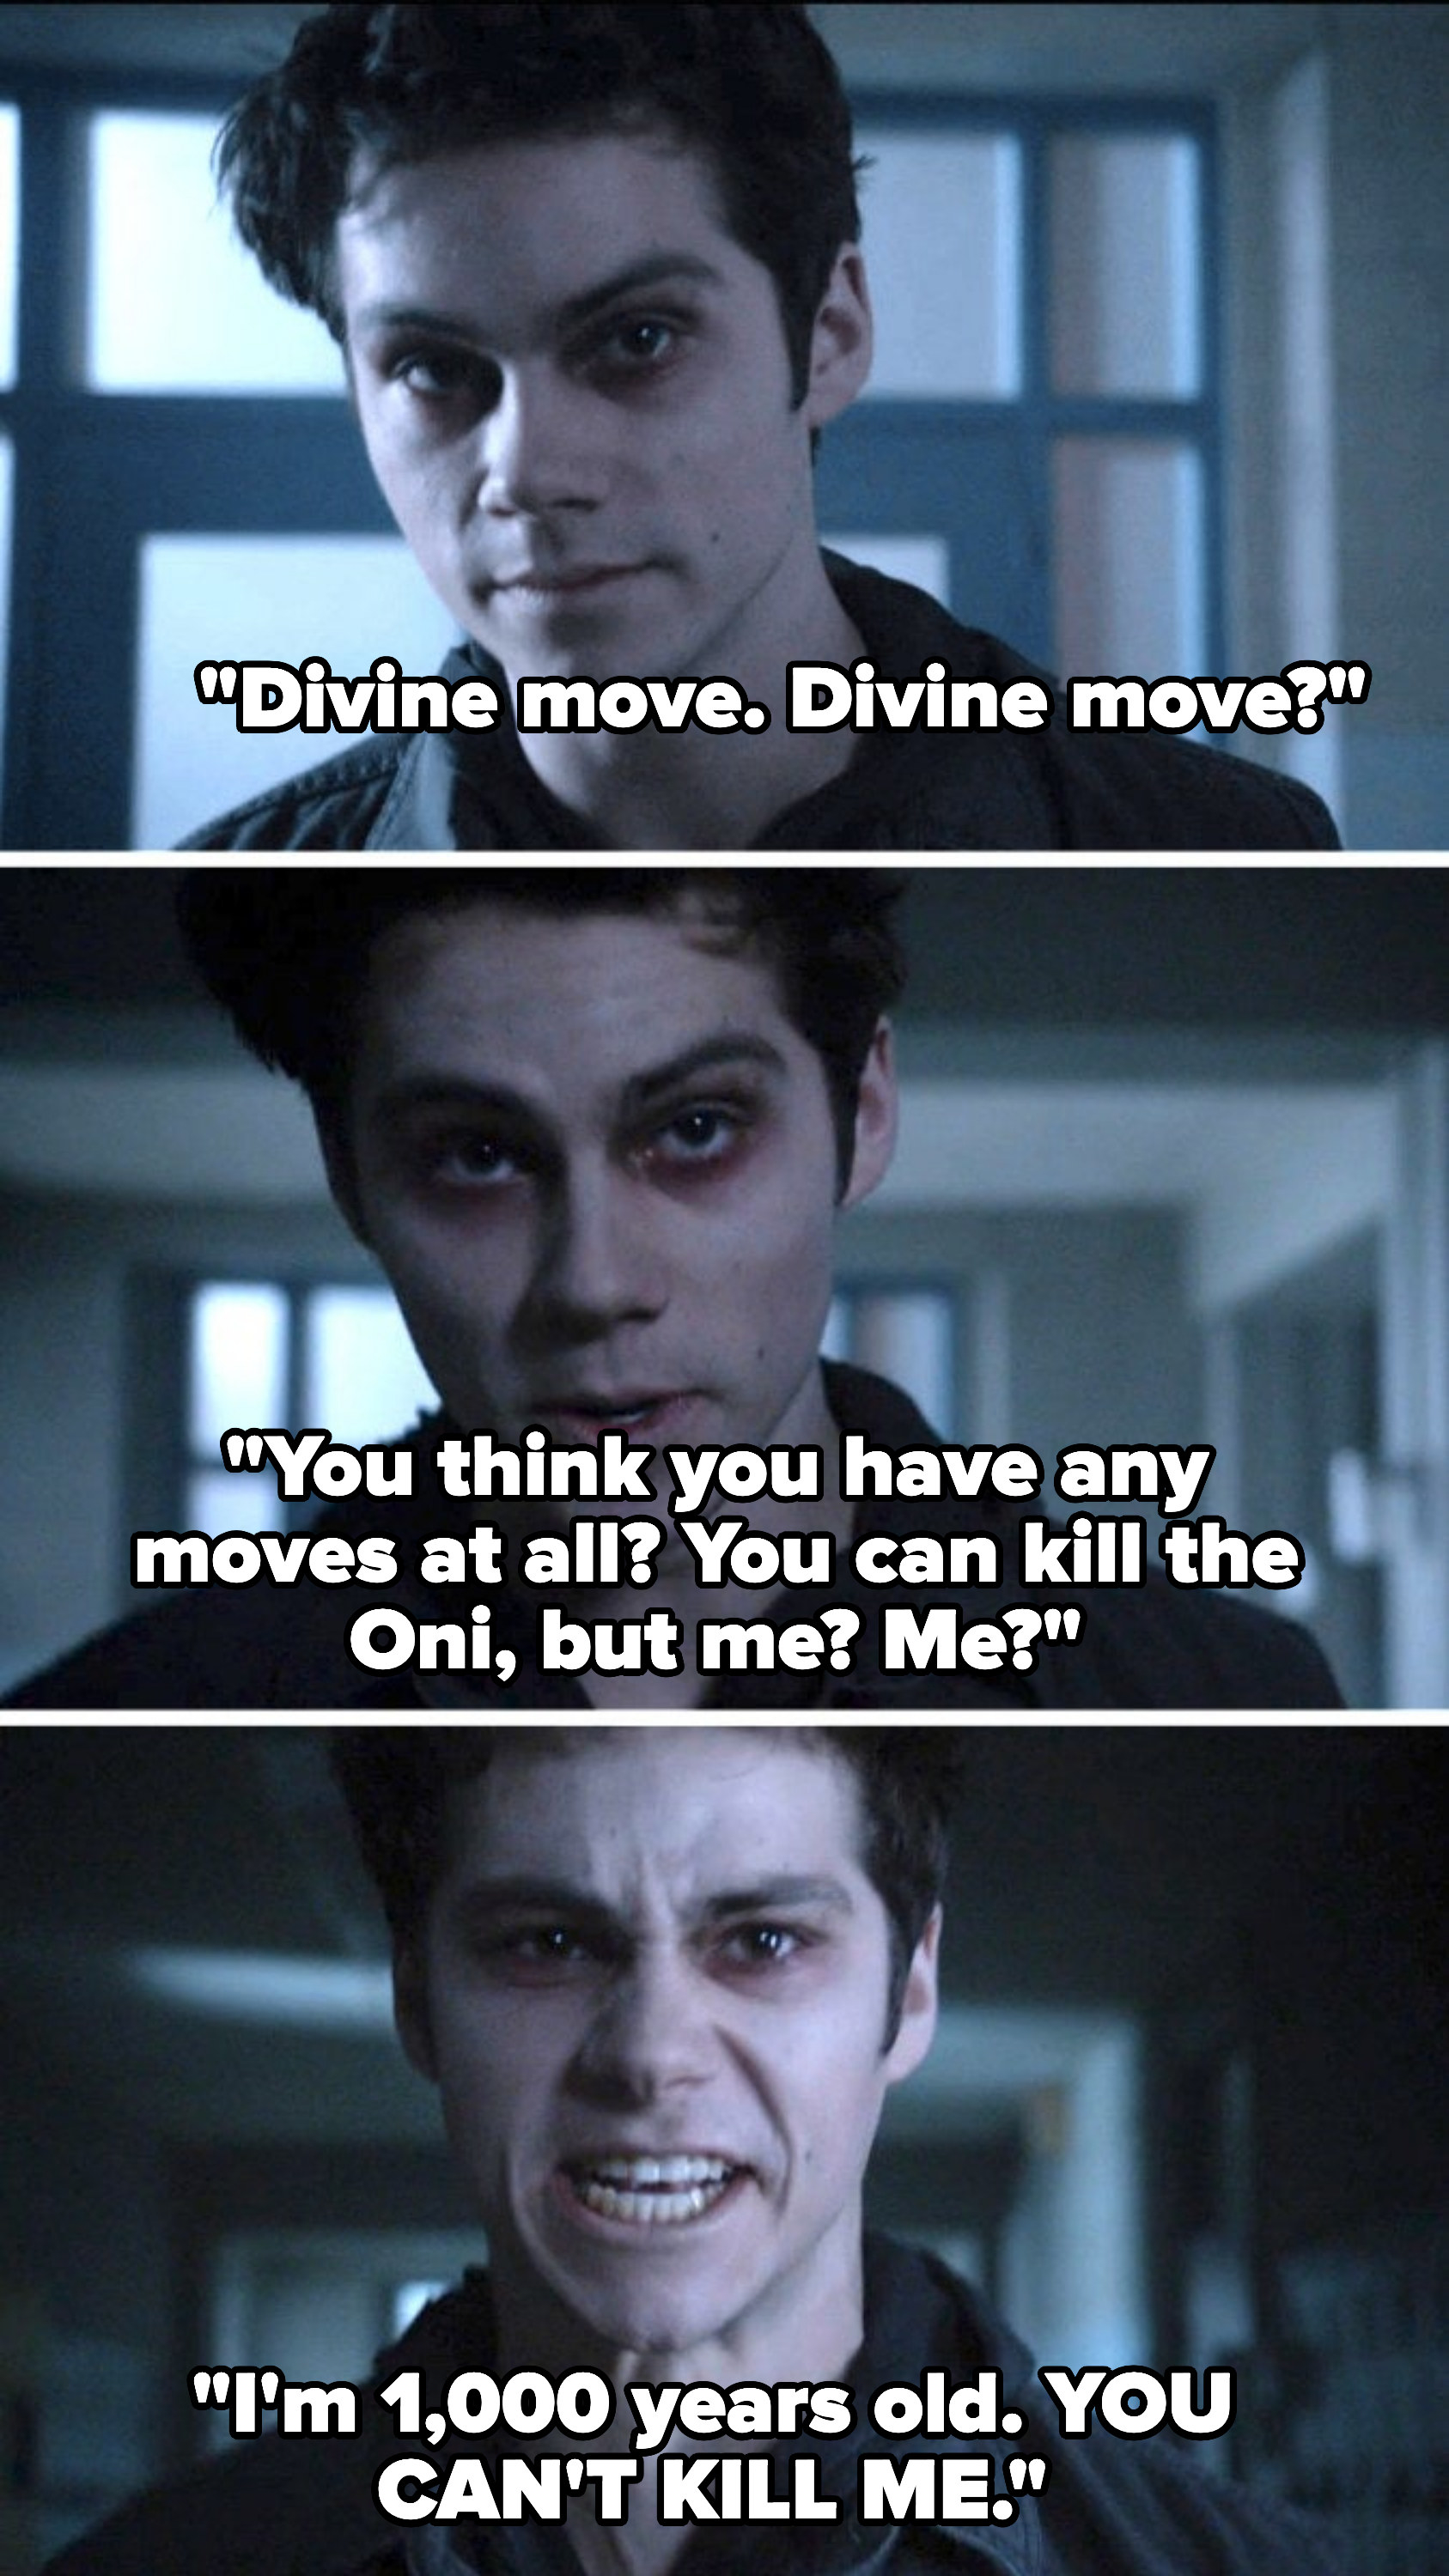 Dylan O&#x27;Brien as a werewolf sayinghe can&#x27;t be killed